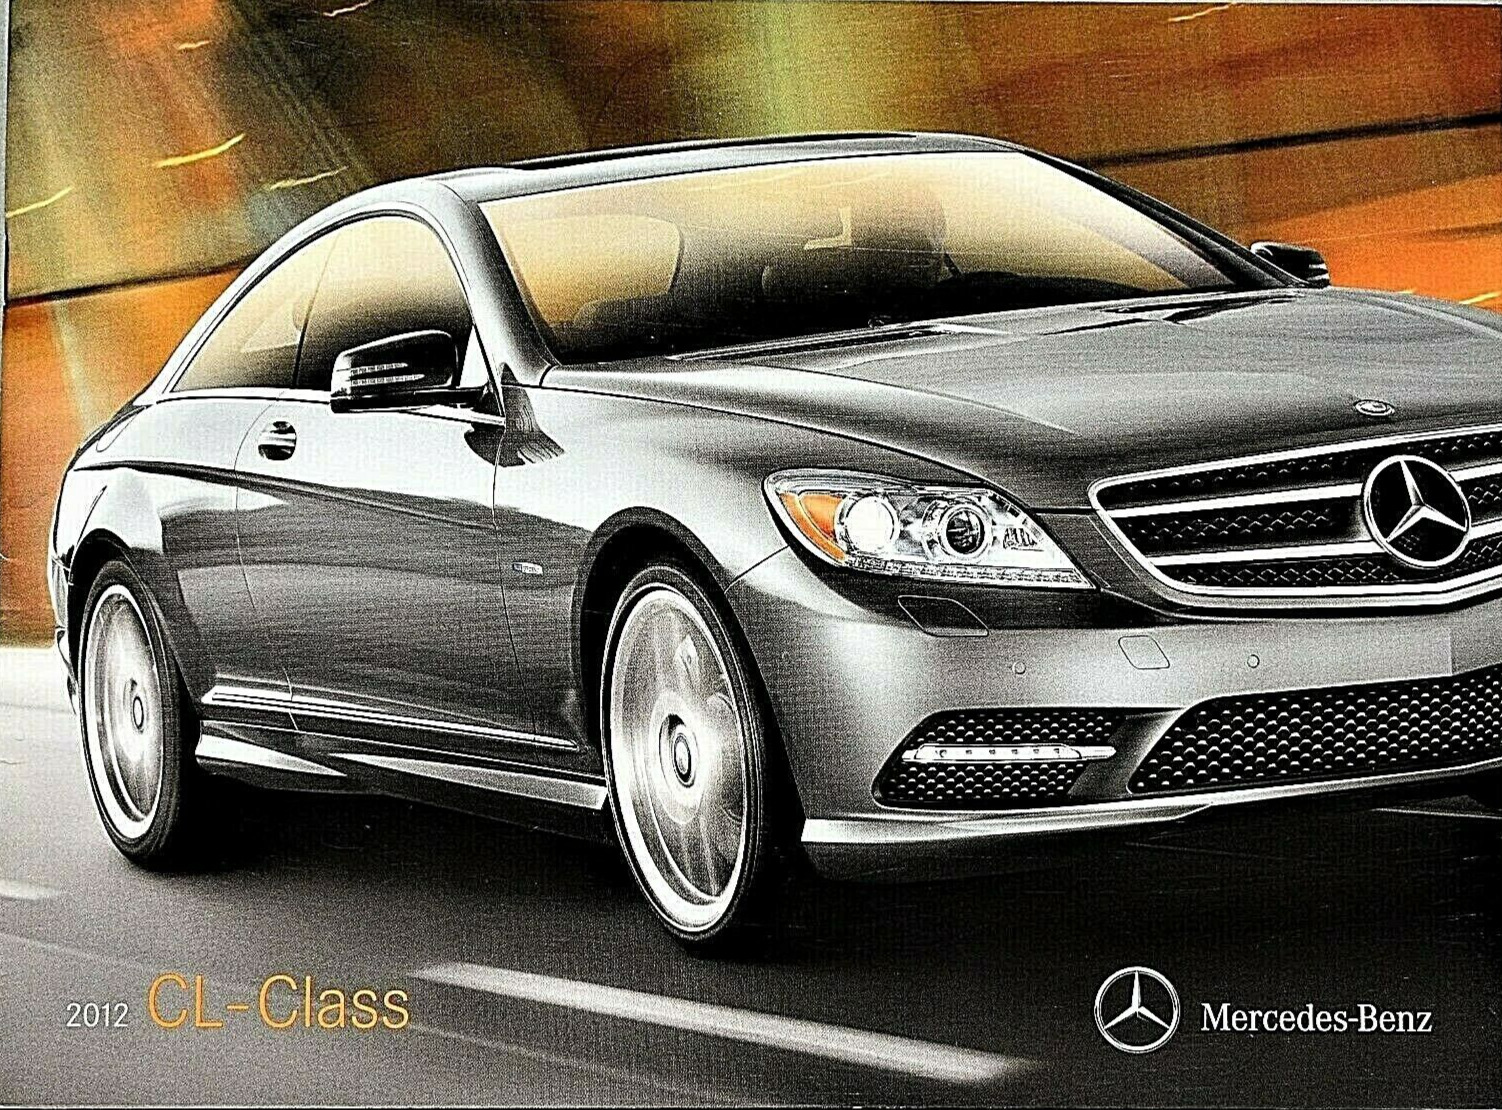 AWESOME NEAR MINT 2012 MERCEDES CL CLASS PREMIUM SALES BROCHURE ~ 20 PAGES